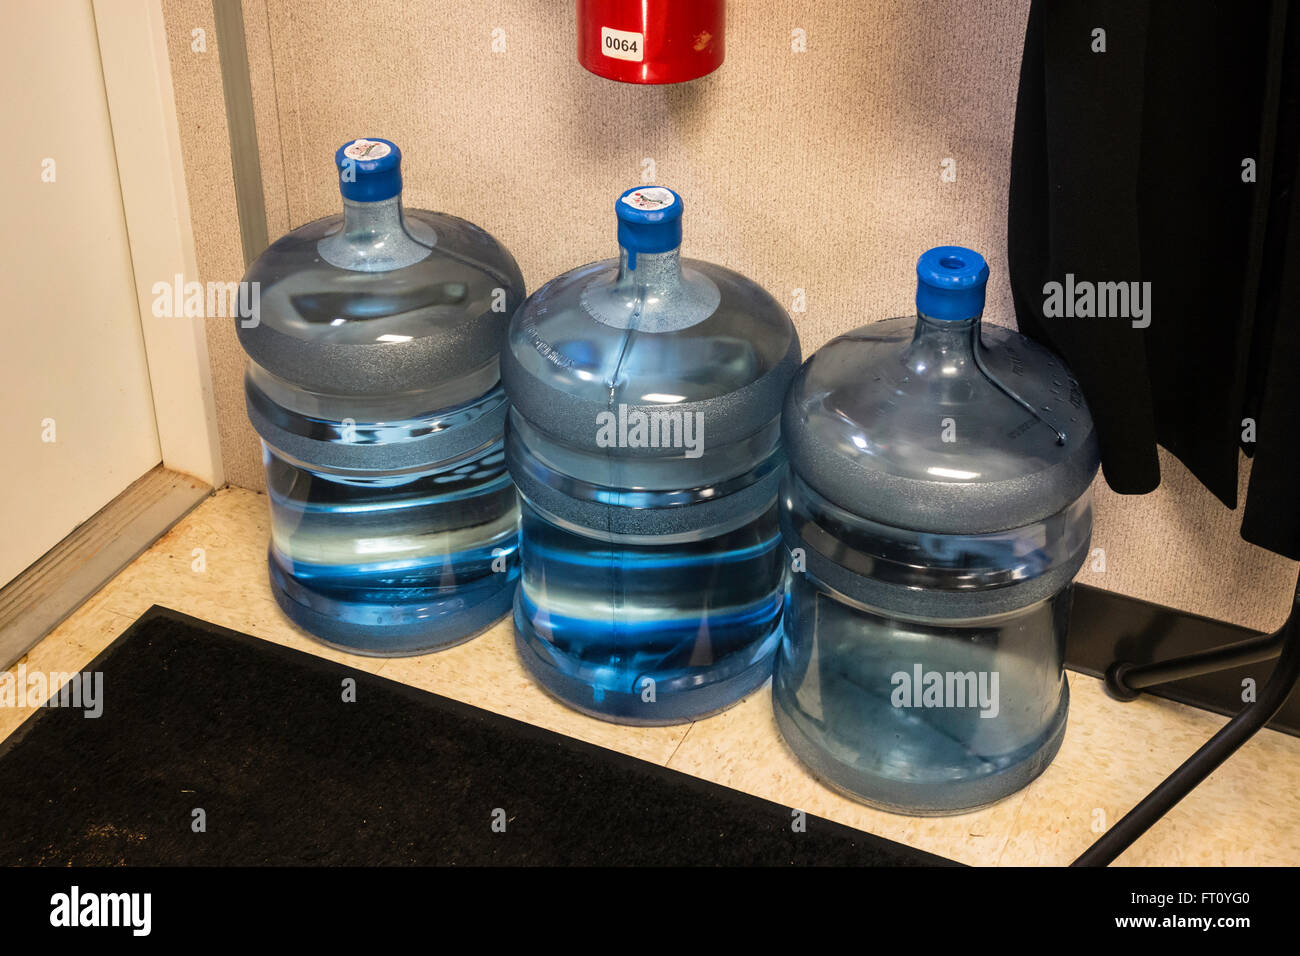 Three 5 gallon water bottles on the floor of a storage area in an office. Stock Photo